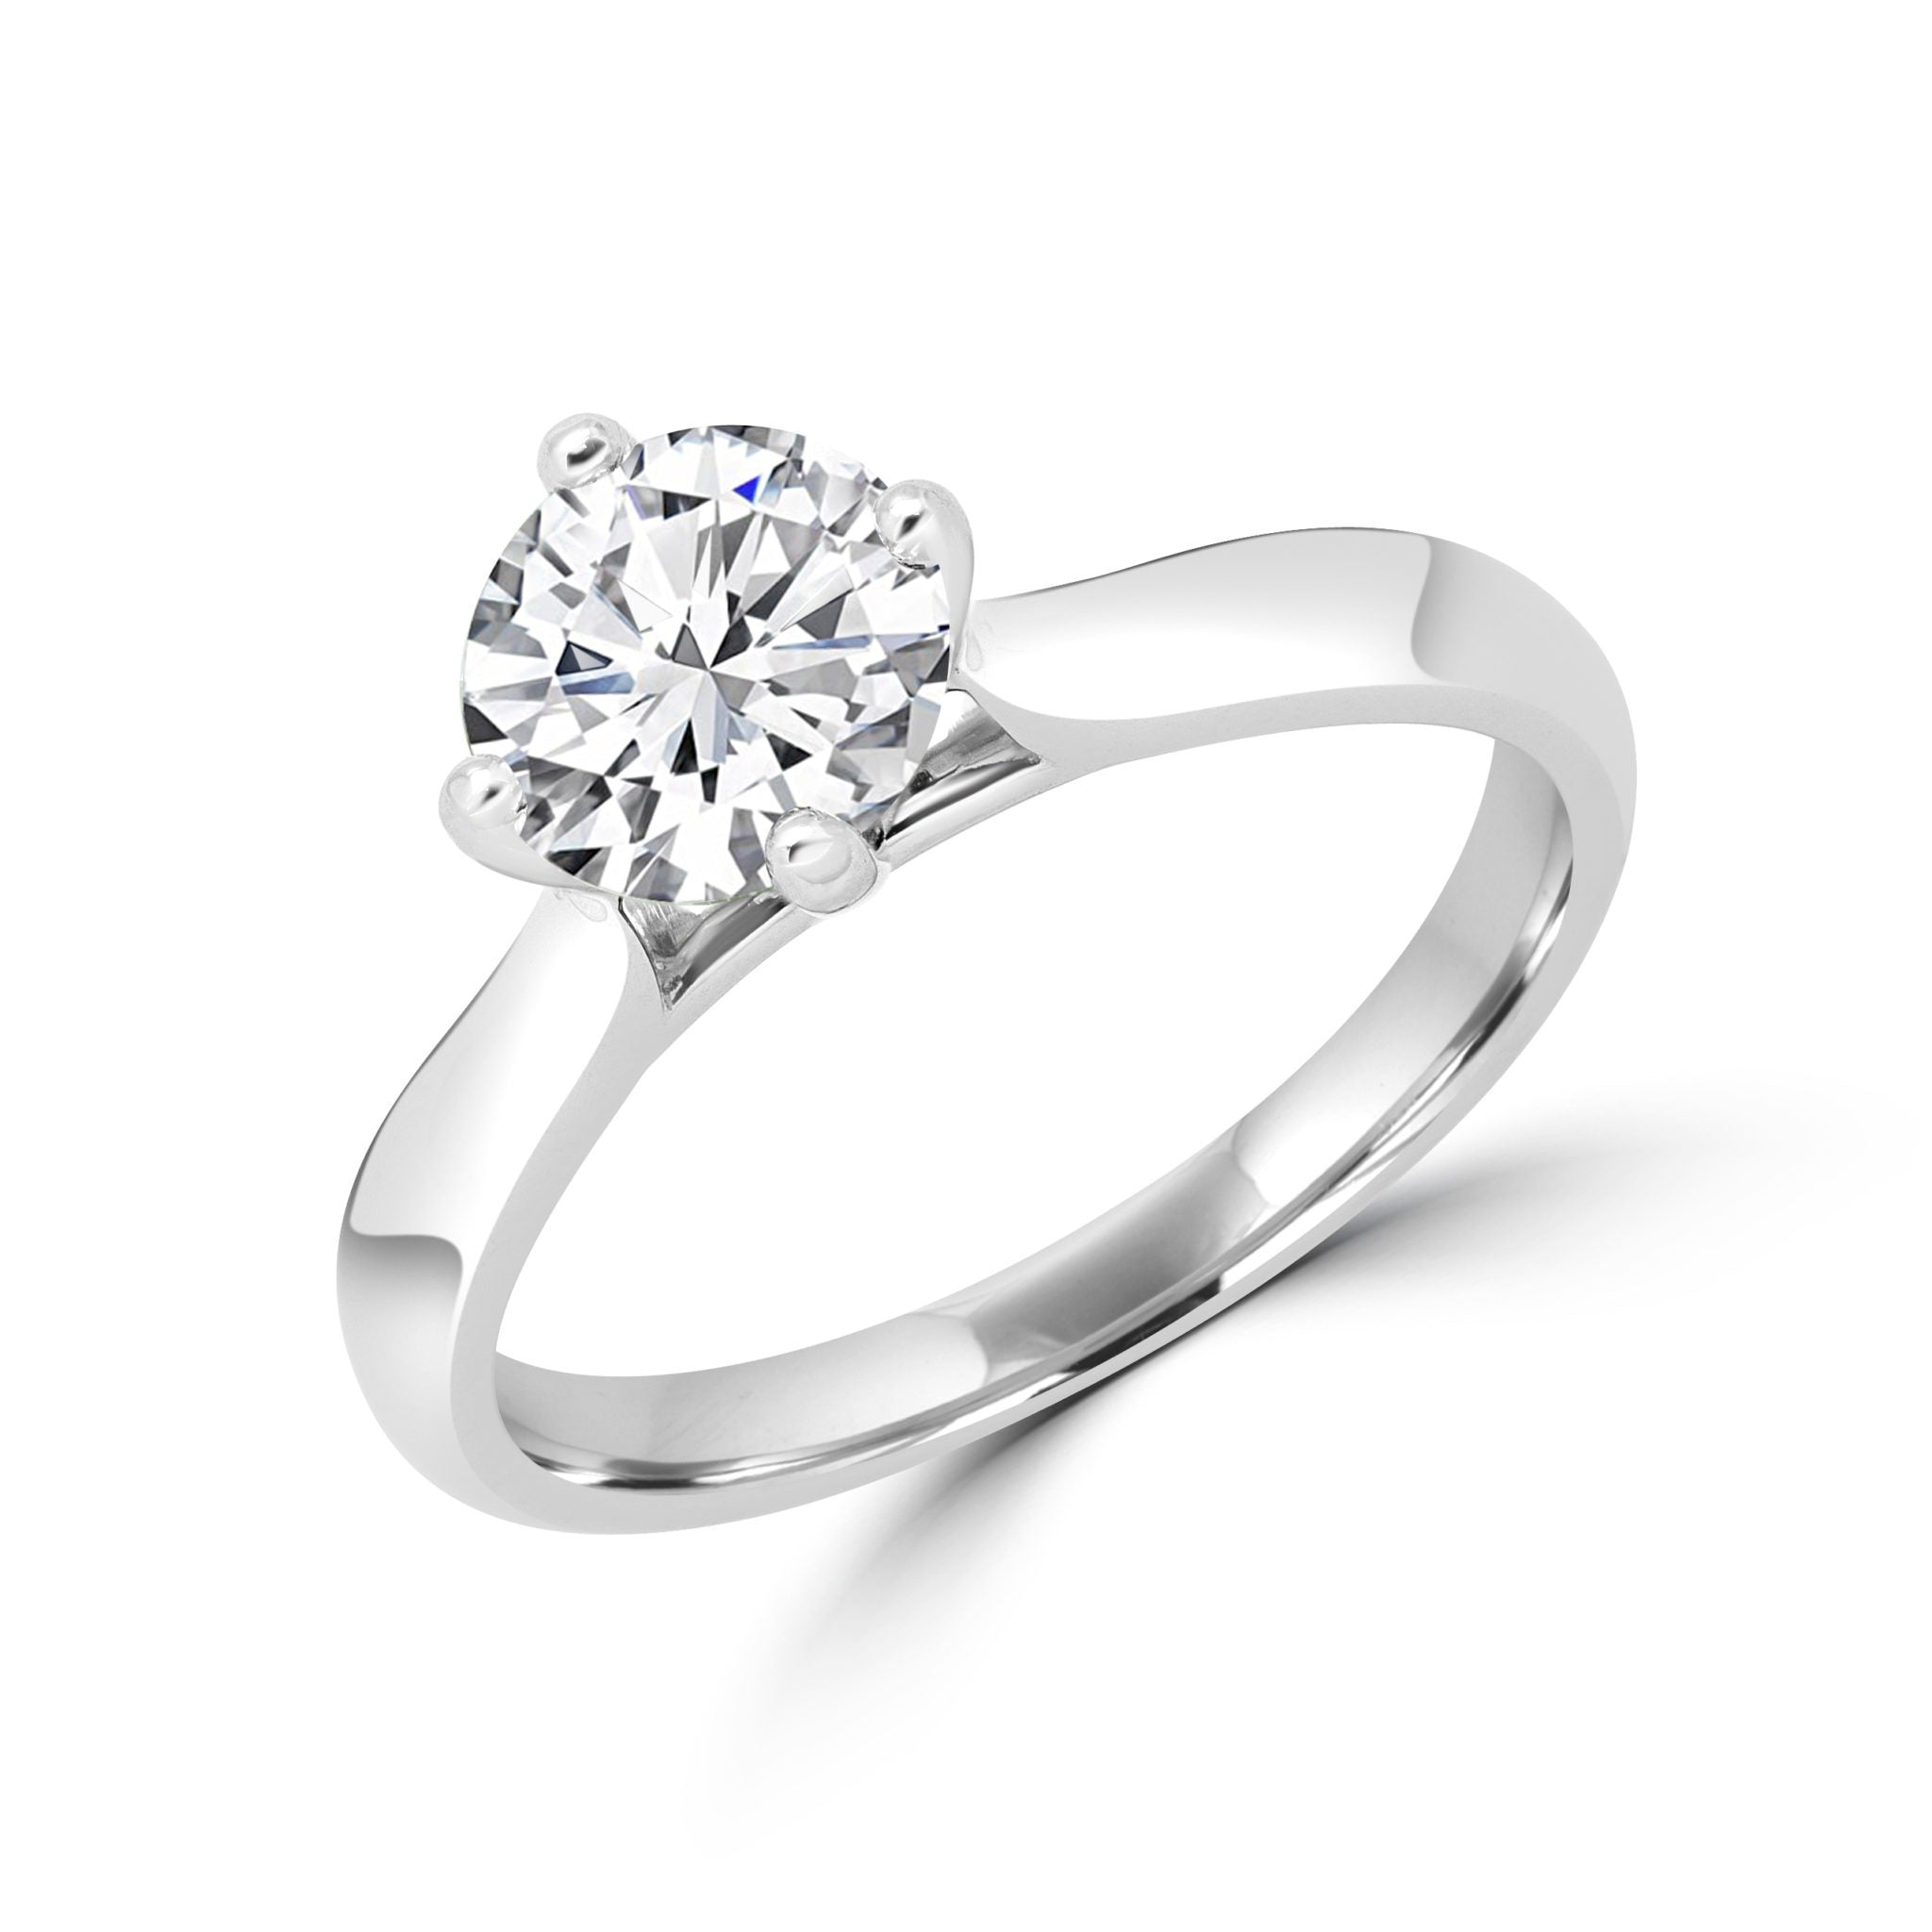 Statement solitaire engagement ring 1.00 (ctw) in 14k gold